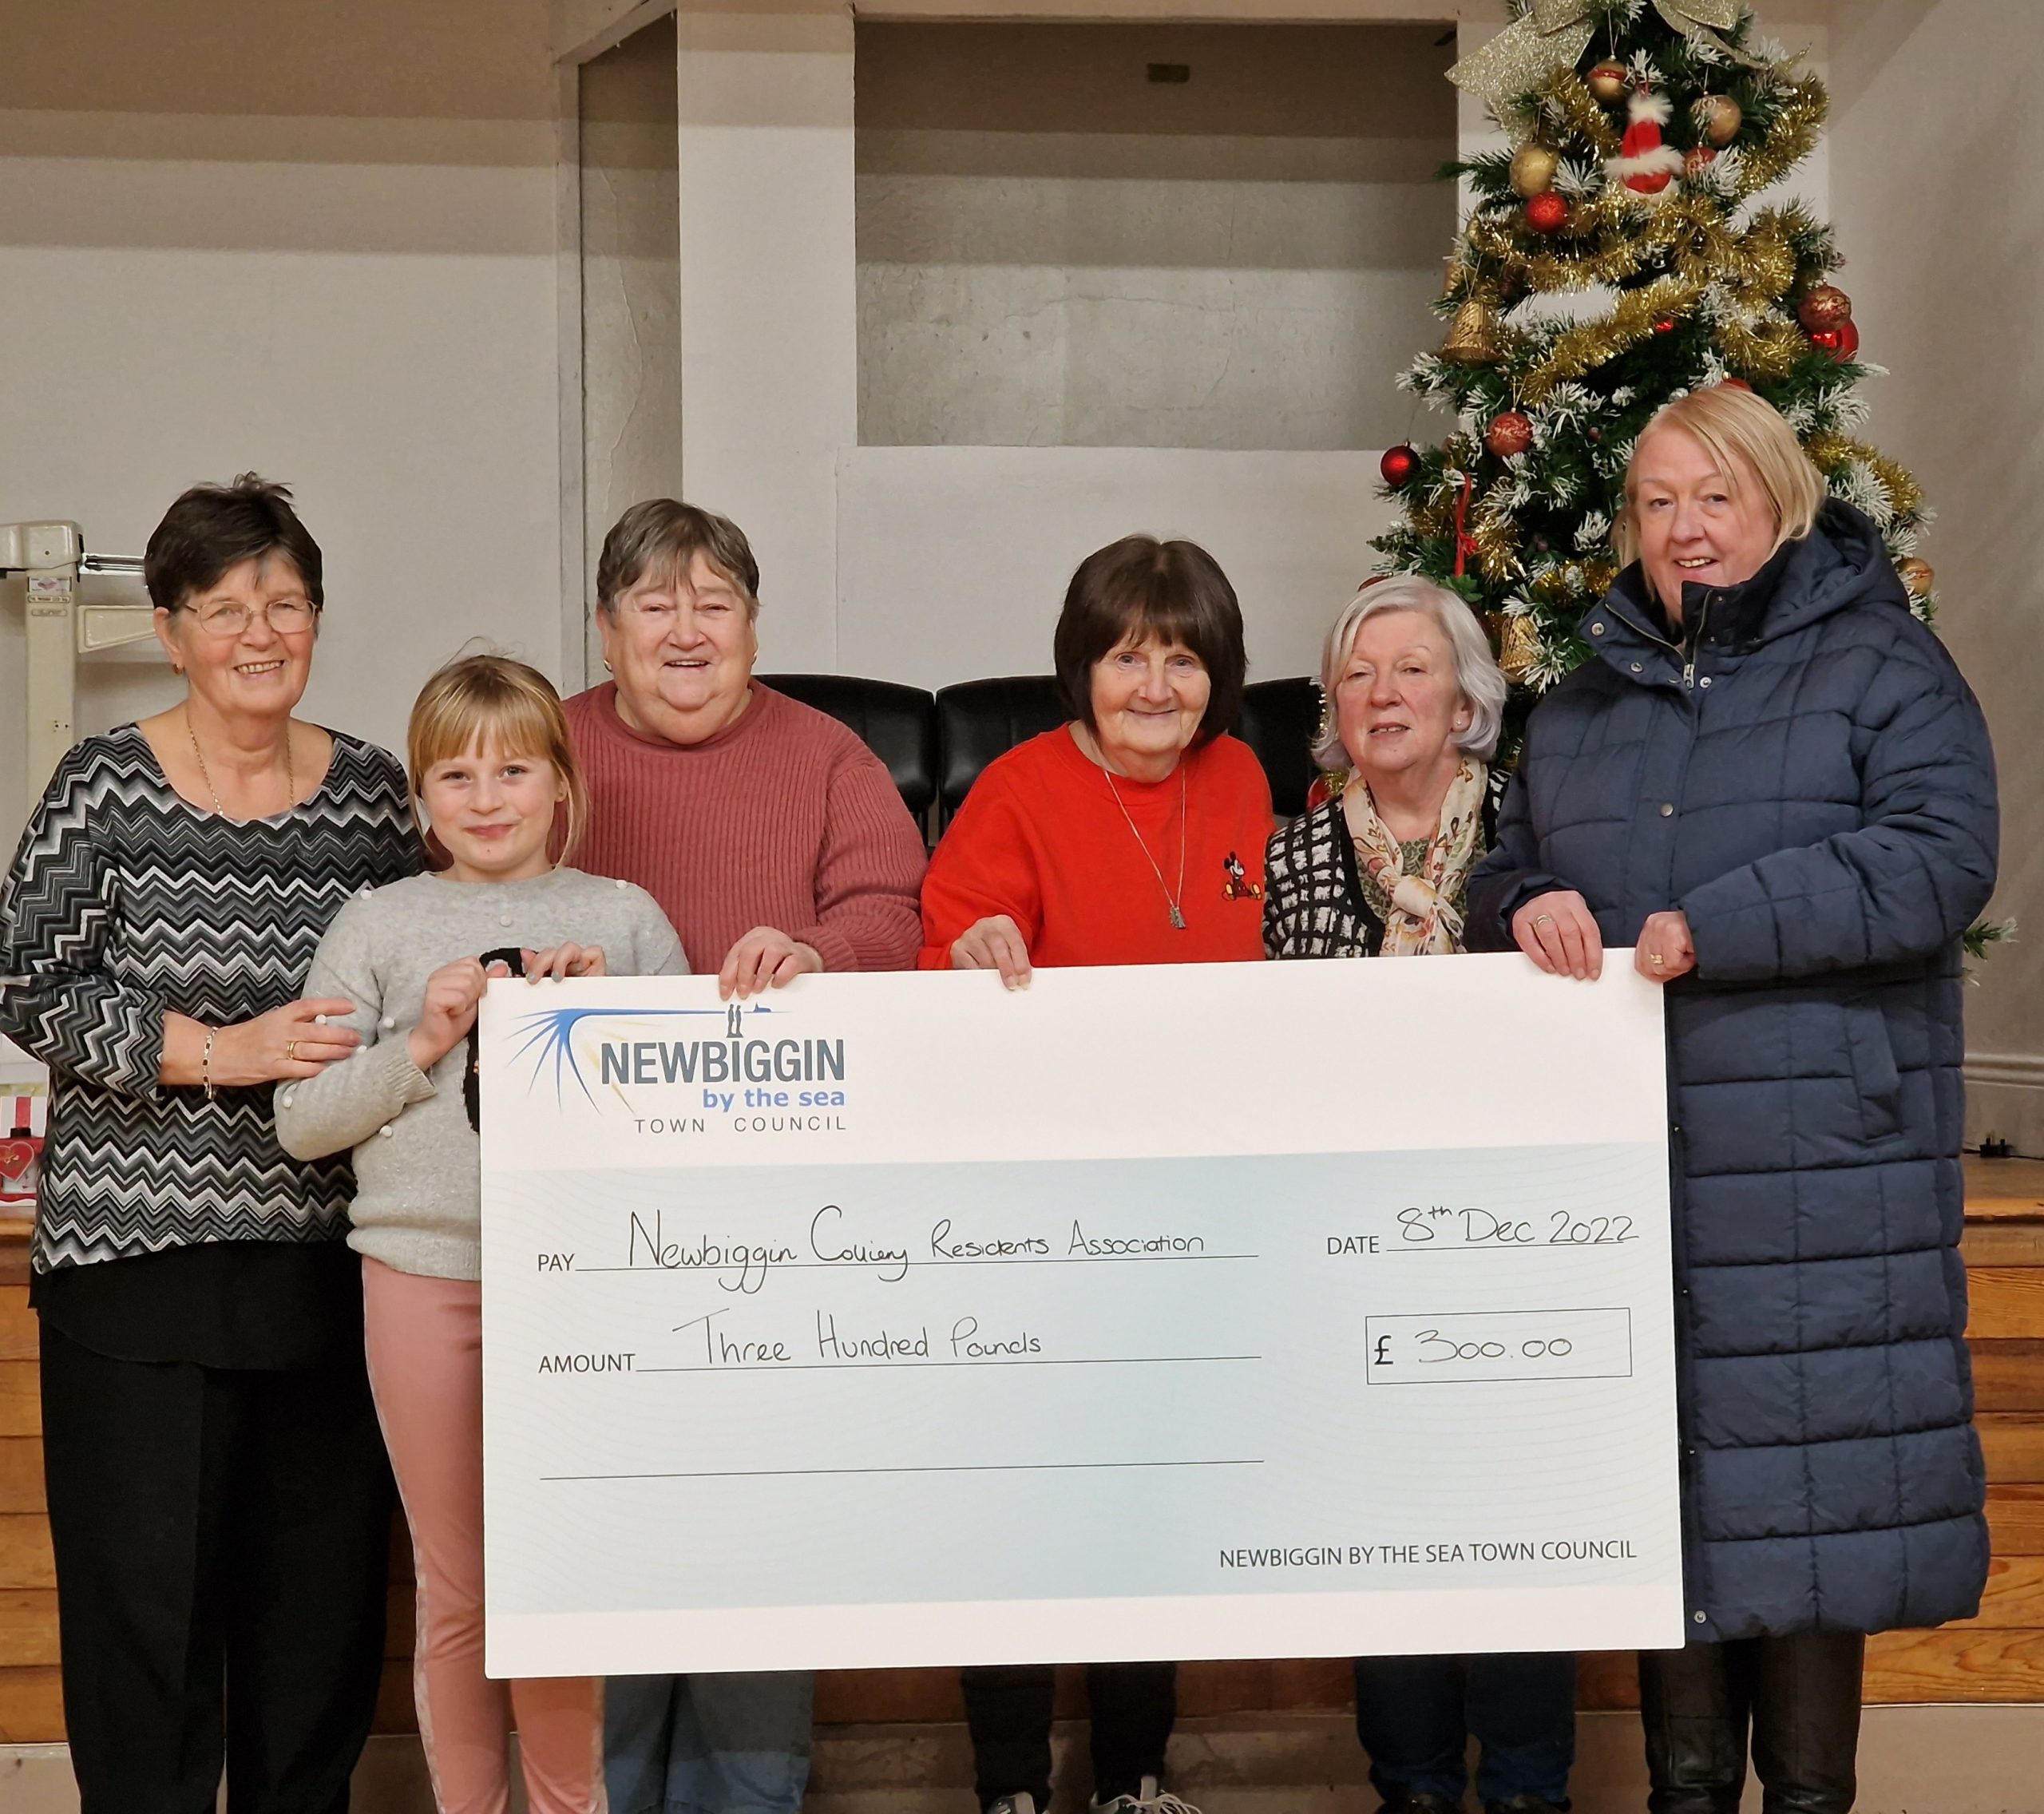 Councillor Alison Sutherland presenting a cheque to the members of Newbiggin Colliery Residents Association.